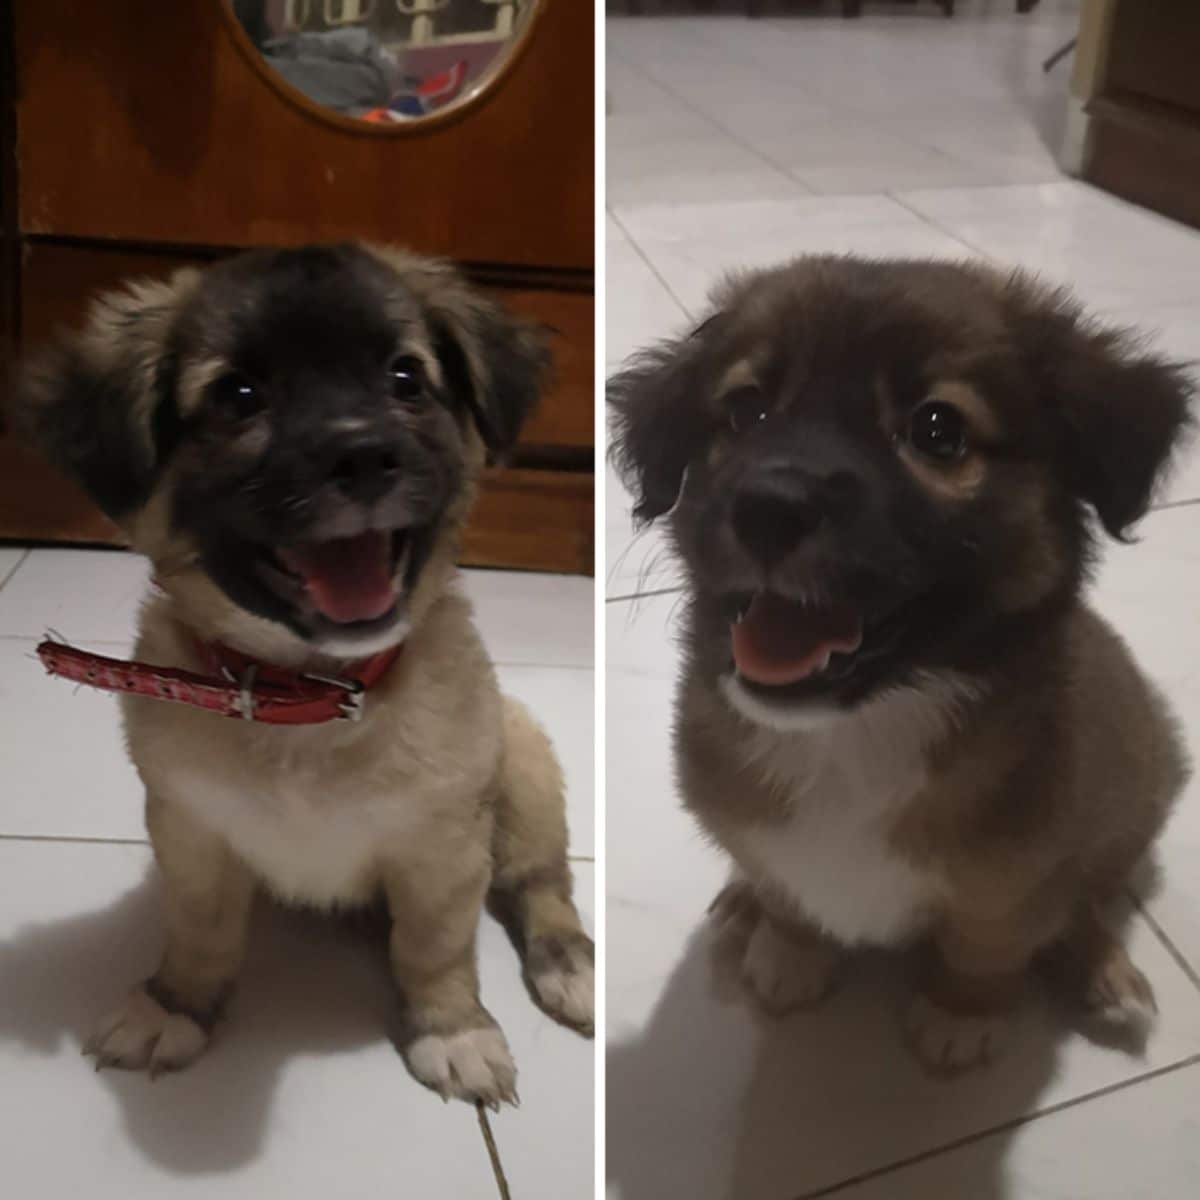 2 photos of smiling brown black and white puppies